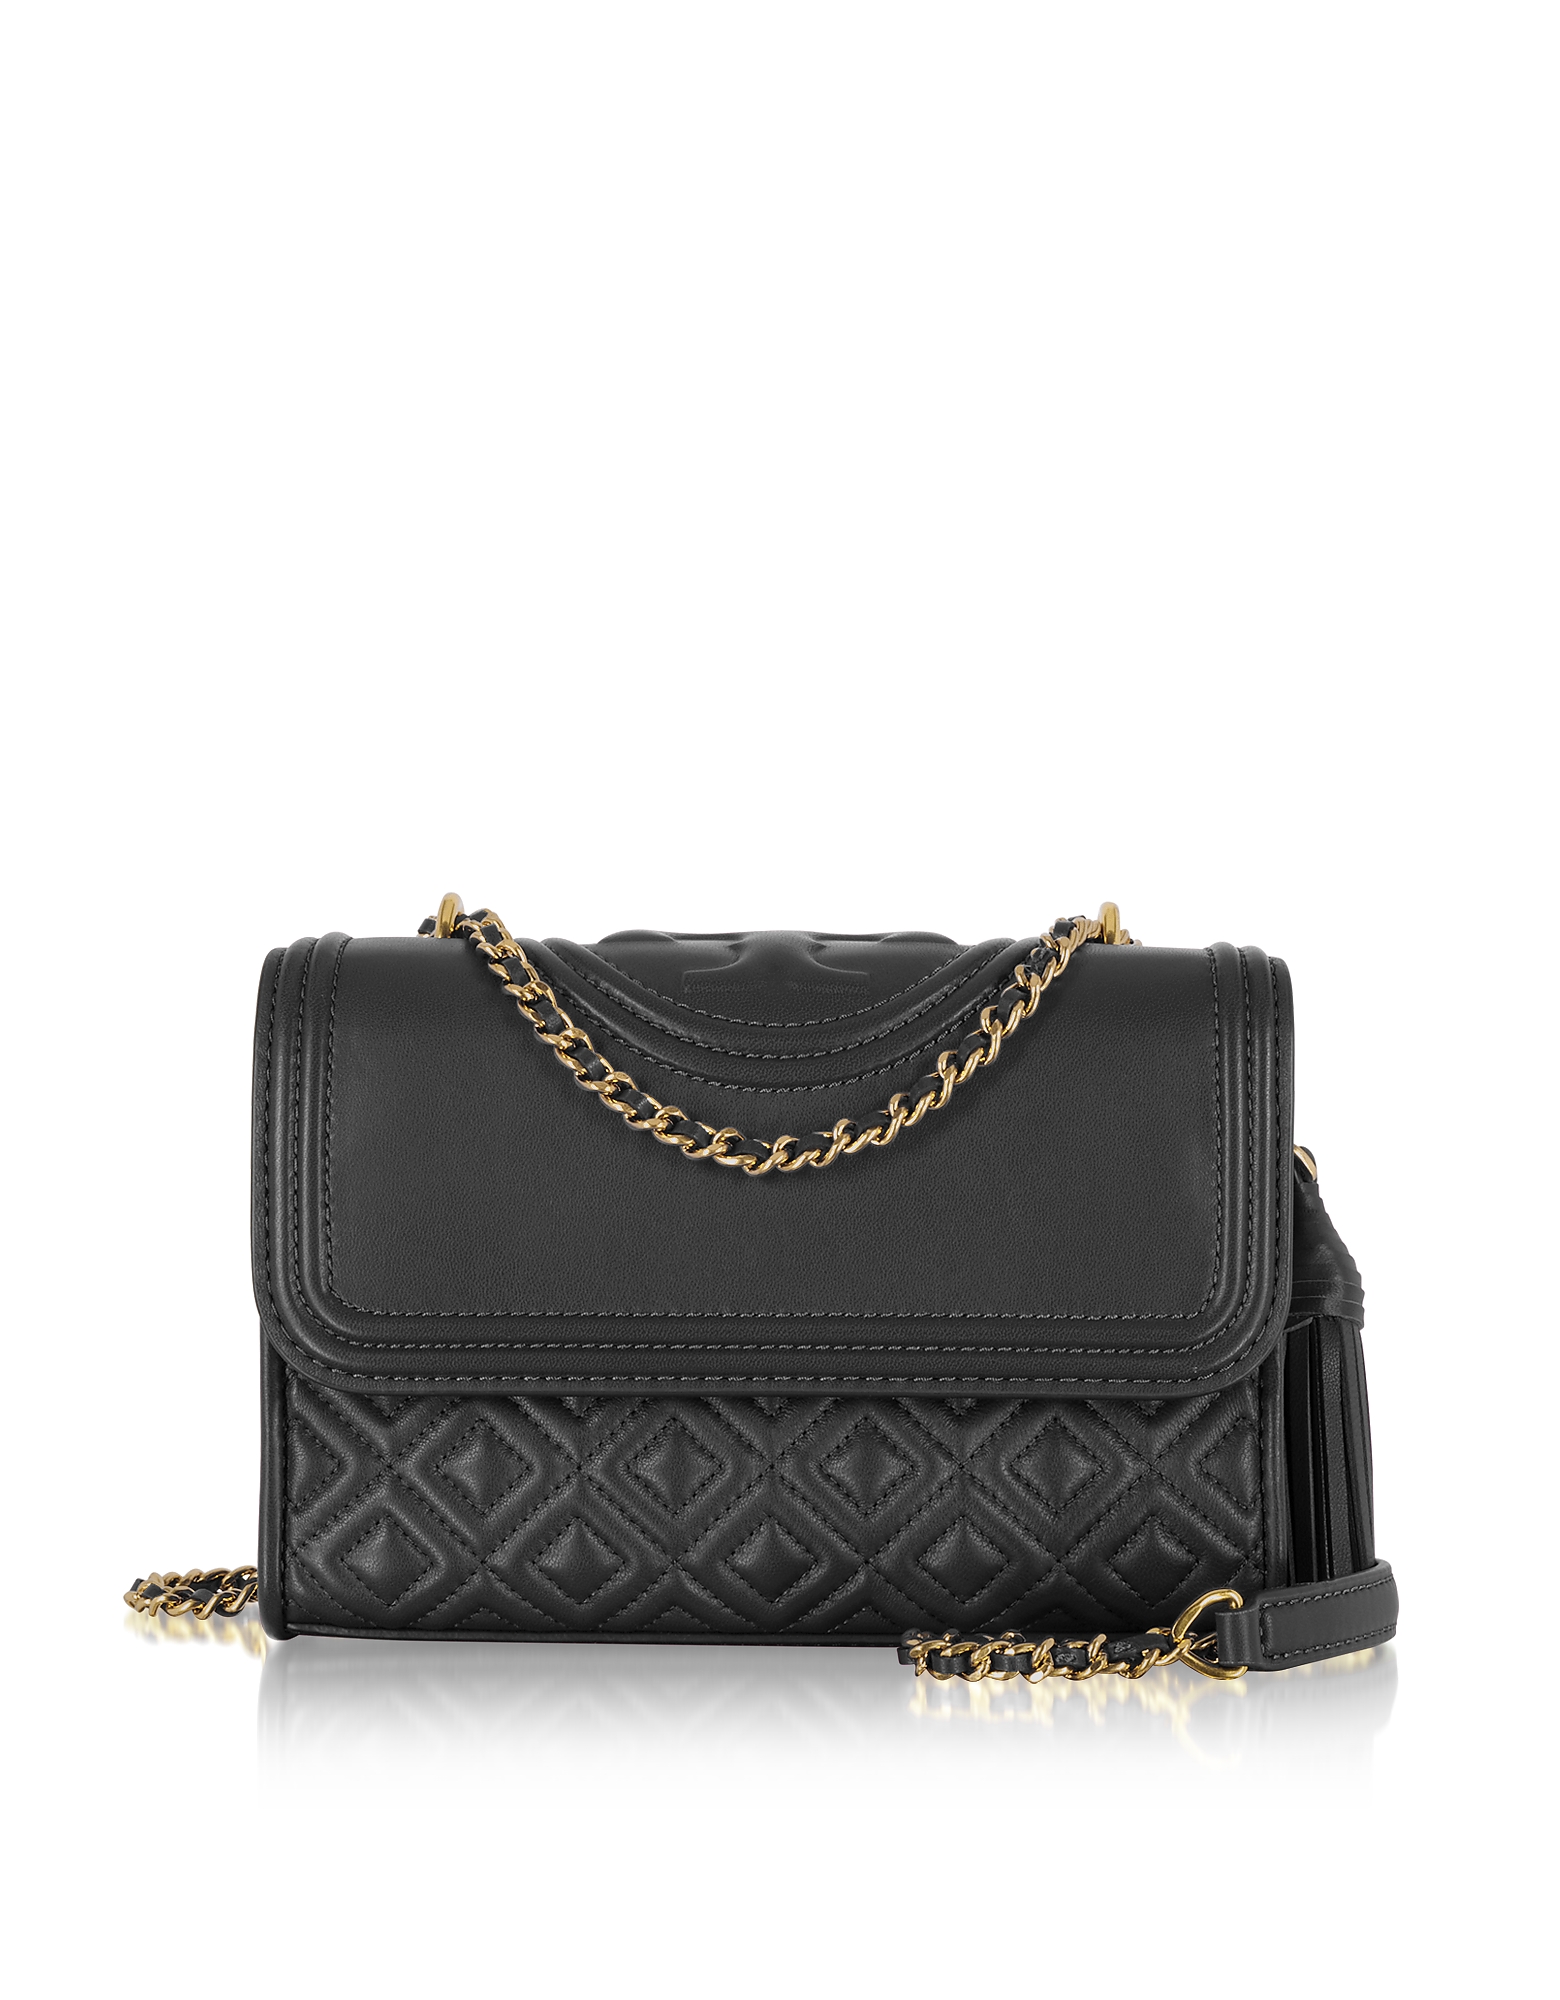 TORY BURCH Small Fleming Quilted Lambskin Leather Convertible Shoulder ...